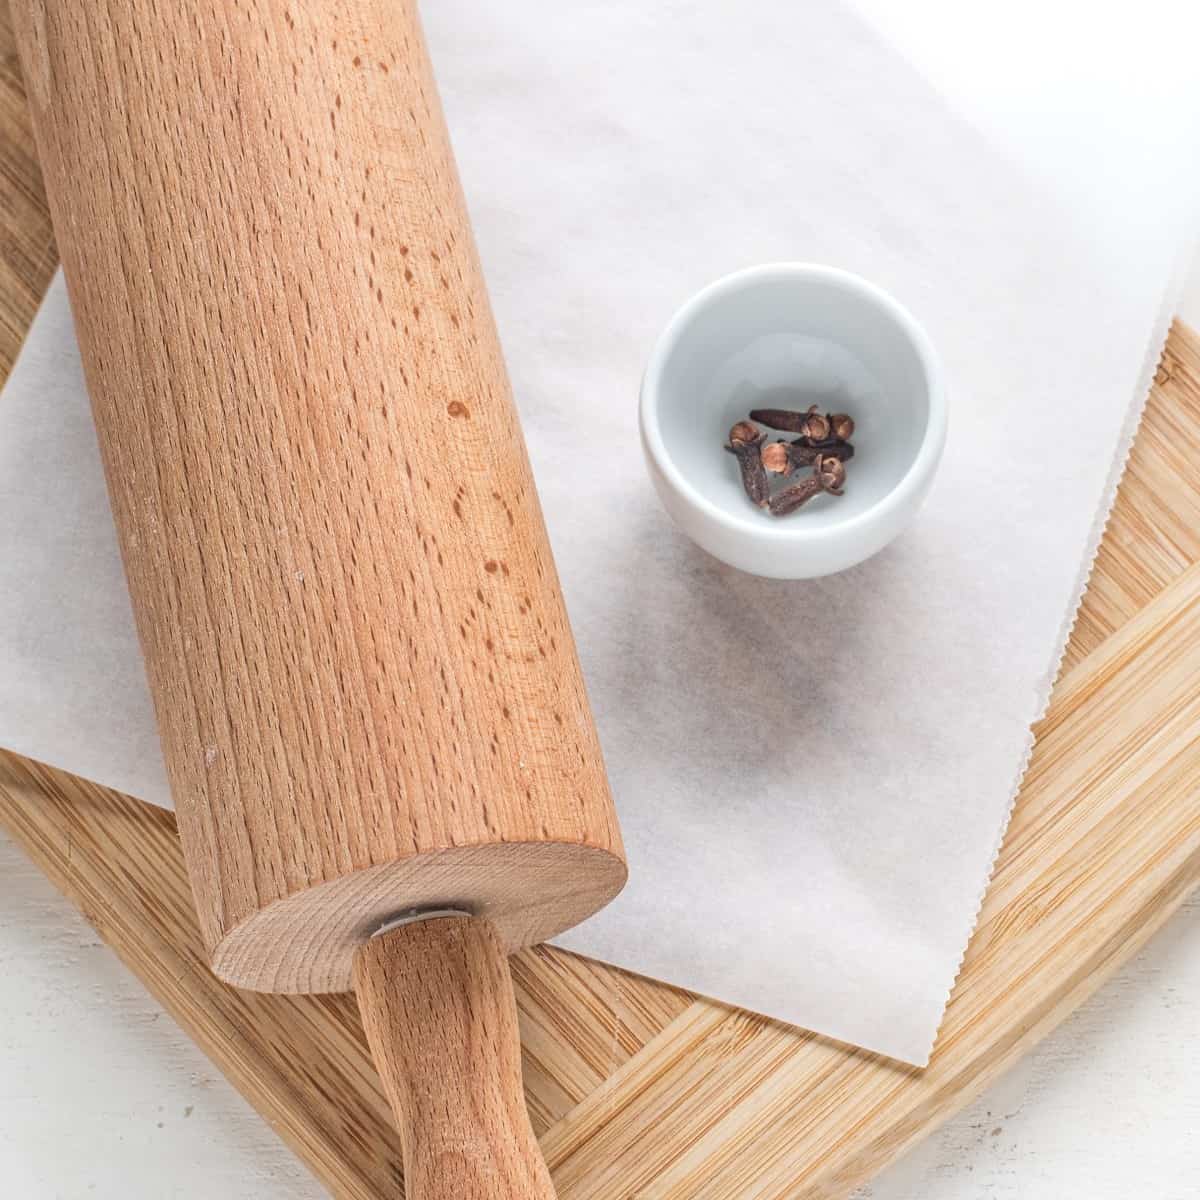 Cloves and rolling pin for crushing spices.